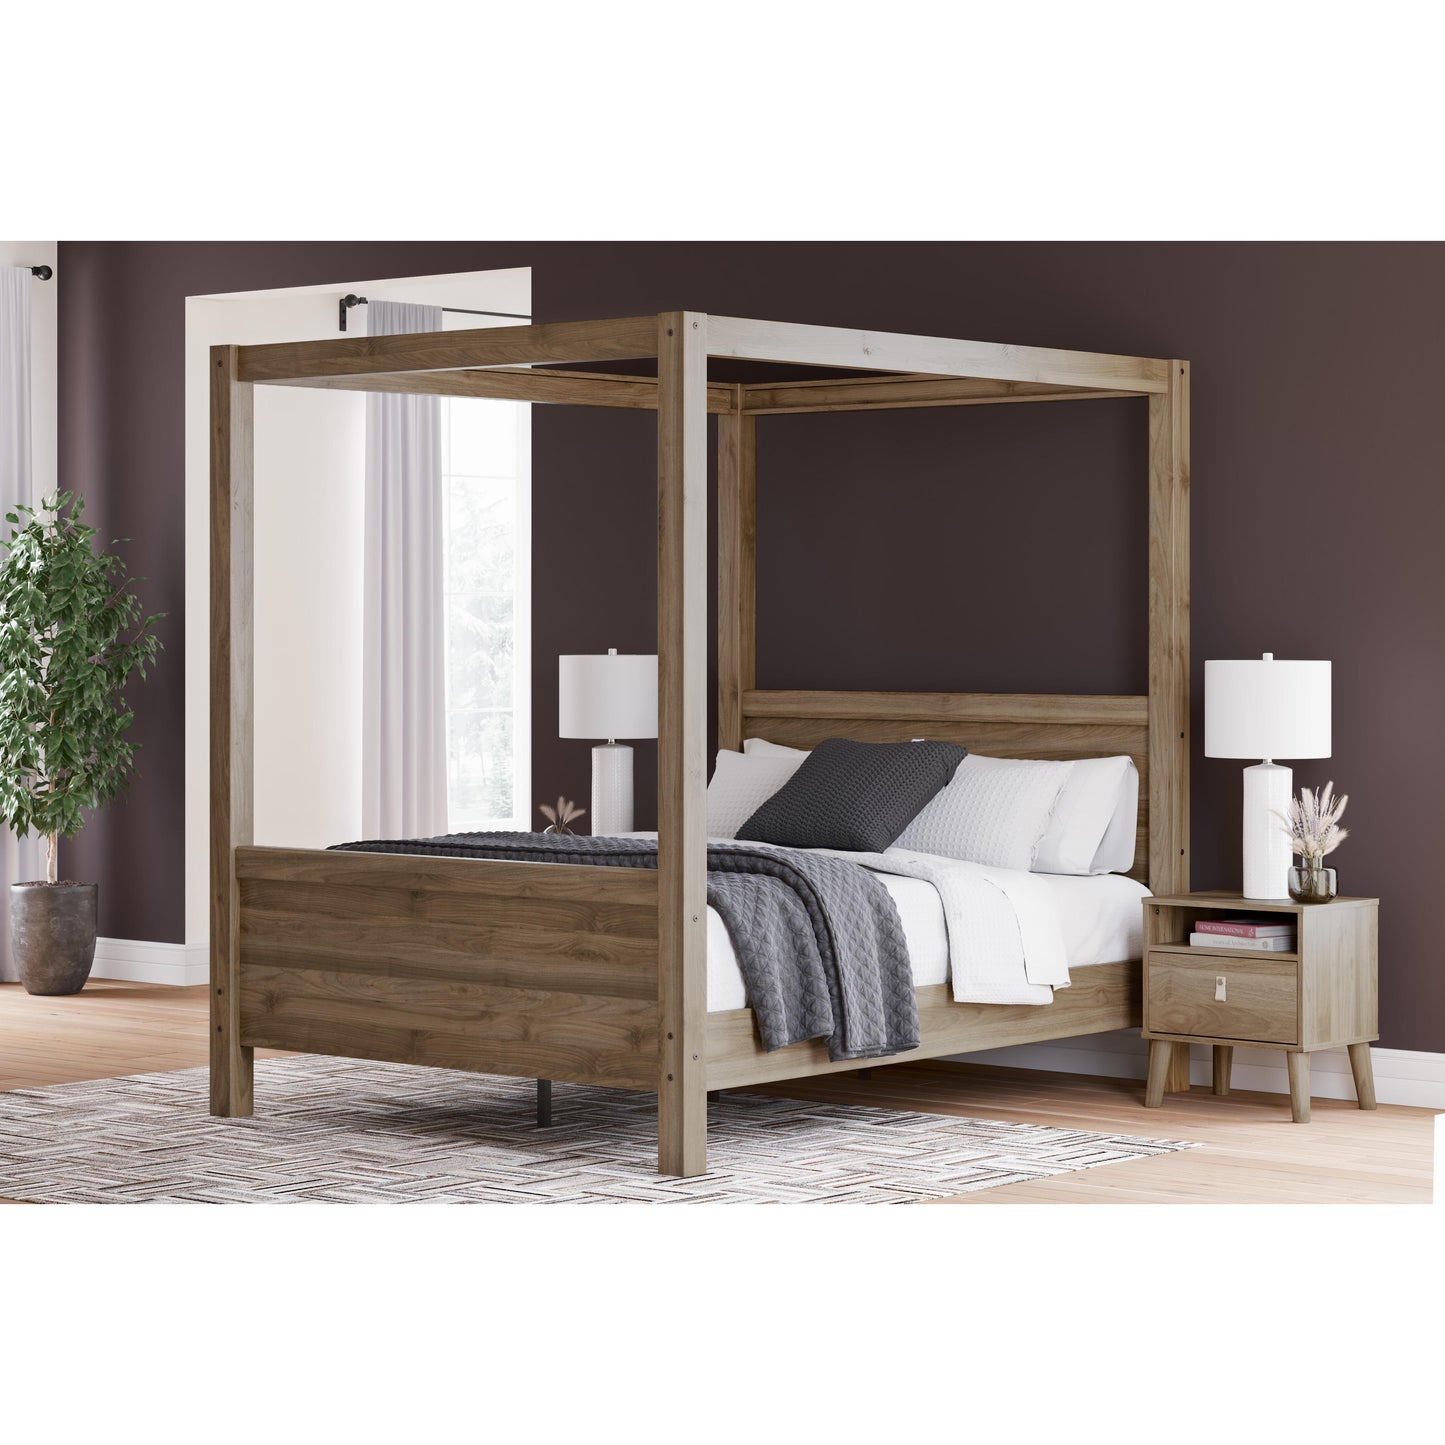 Signature Design by Ashley Aprilyn Queen Canopy Bed EB1187-171/EB1187-198/EB1187-161 IMAGE 6